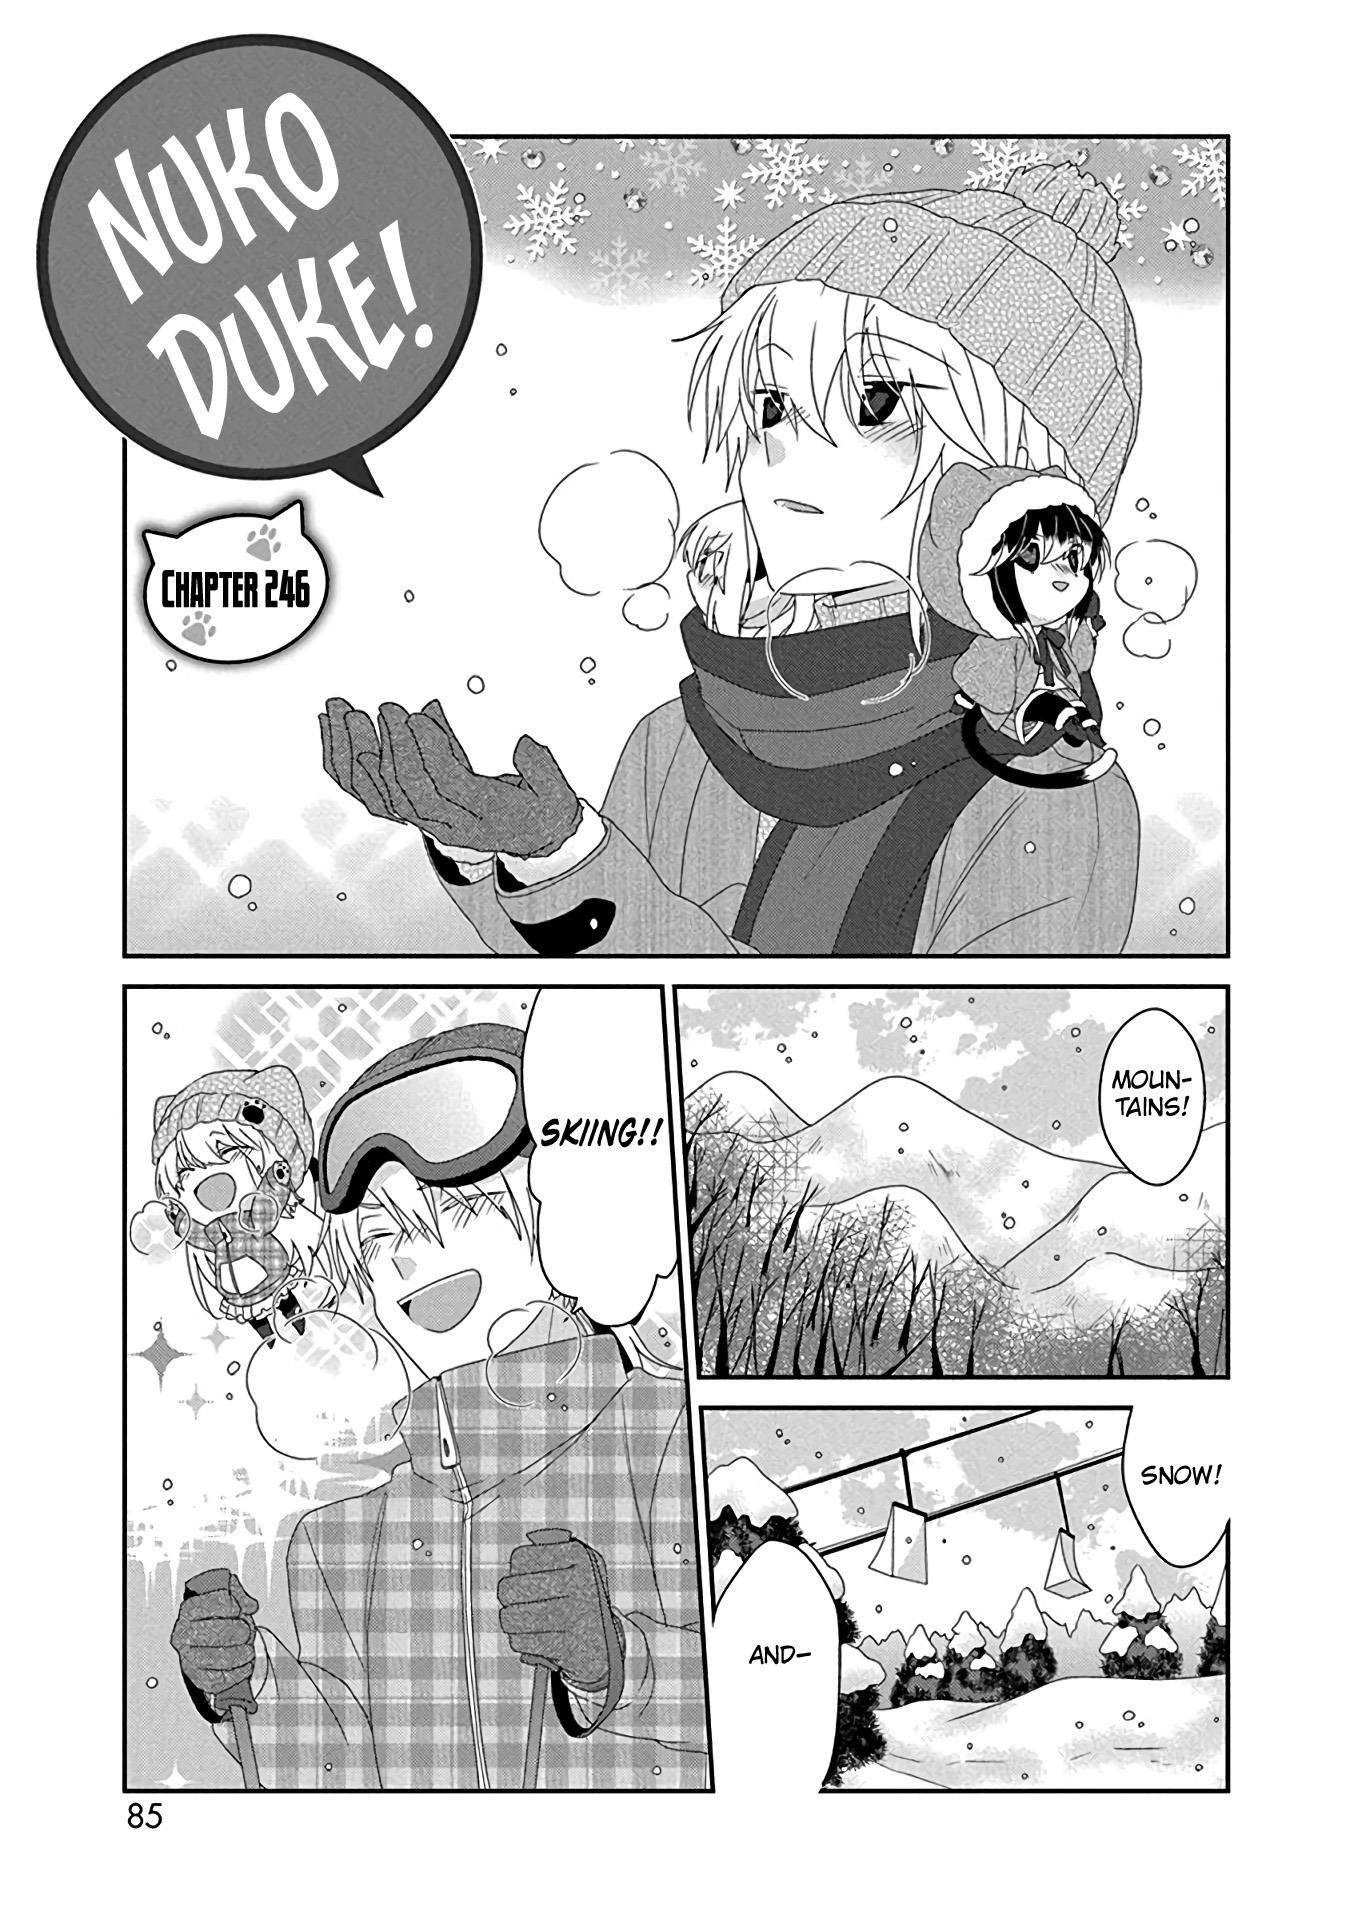 Nukoduke! Vol.10 Chapter 246 - Picture 2